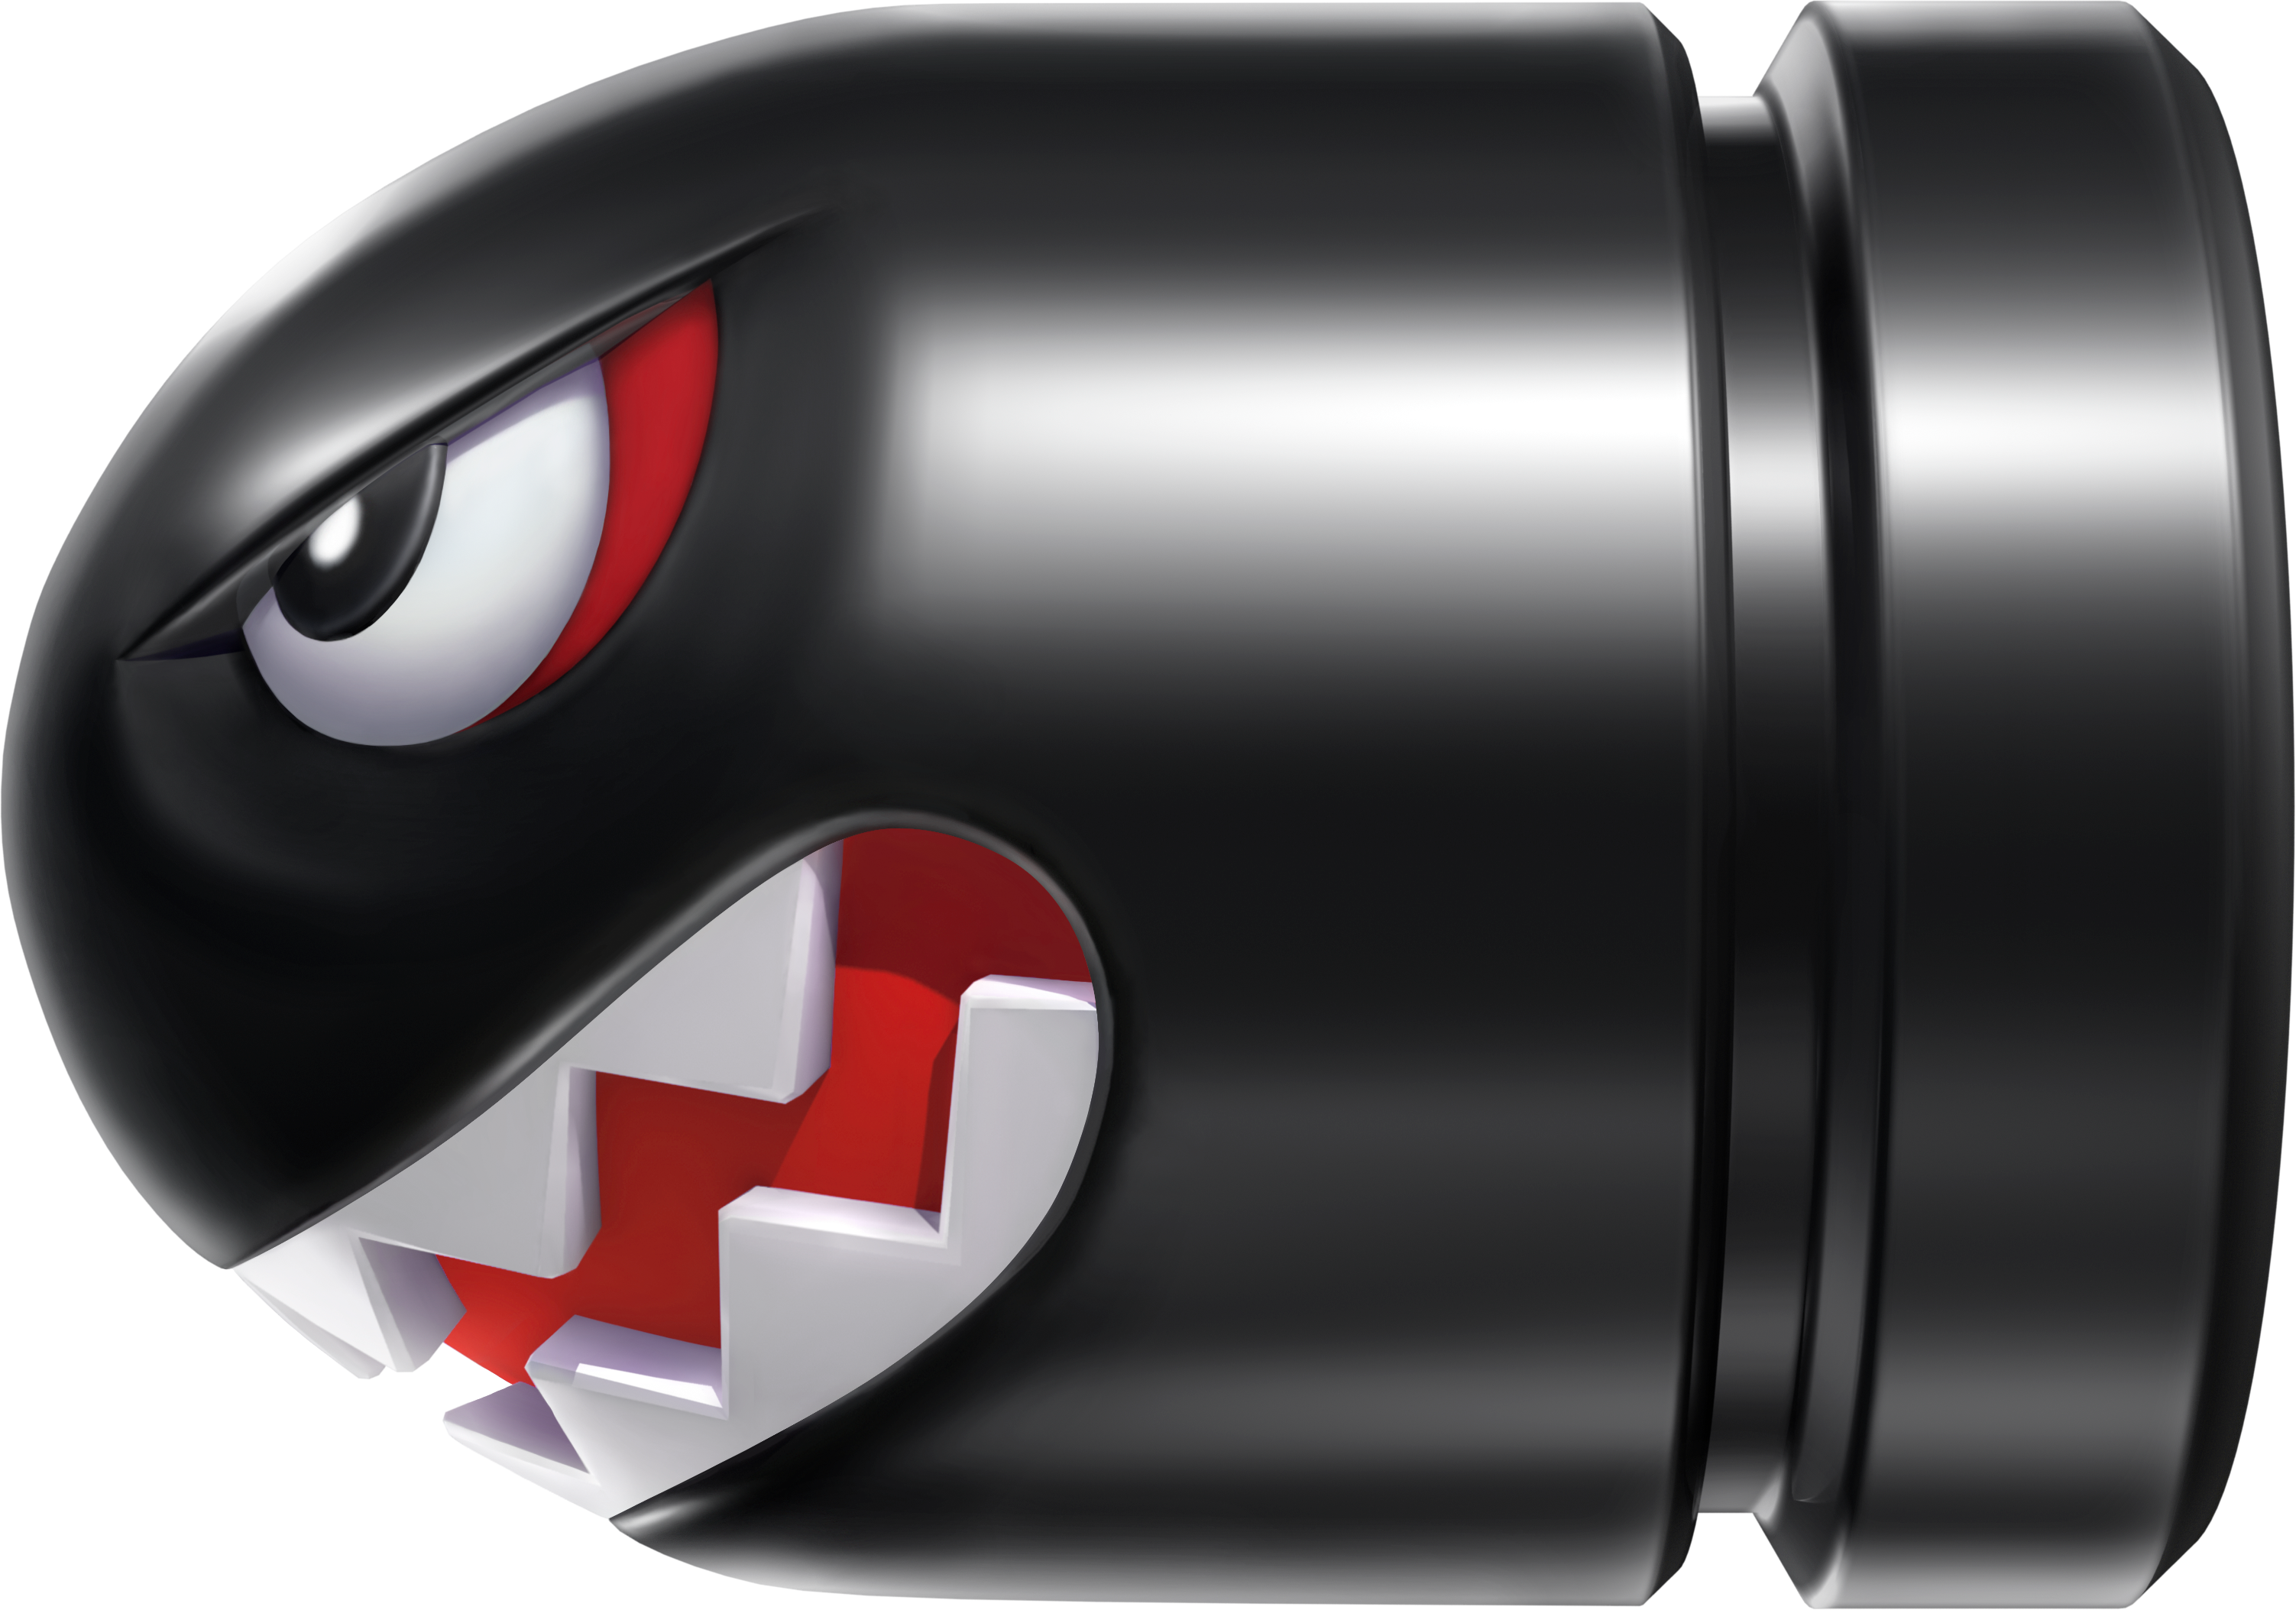 Technology Wii Lens Mario Bros World Super PNG Image